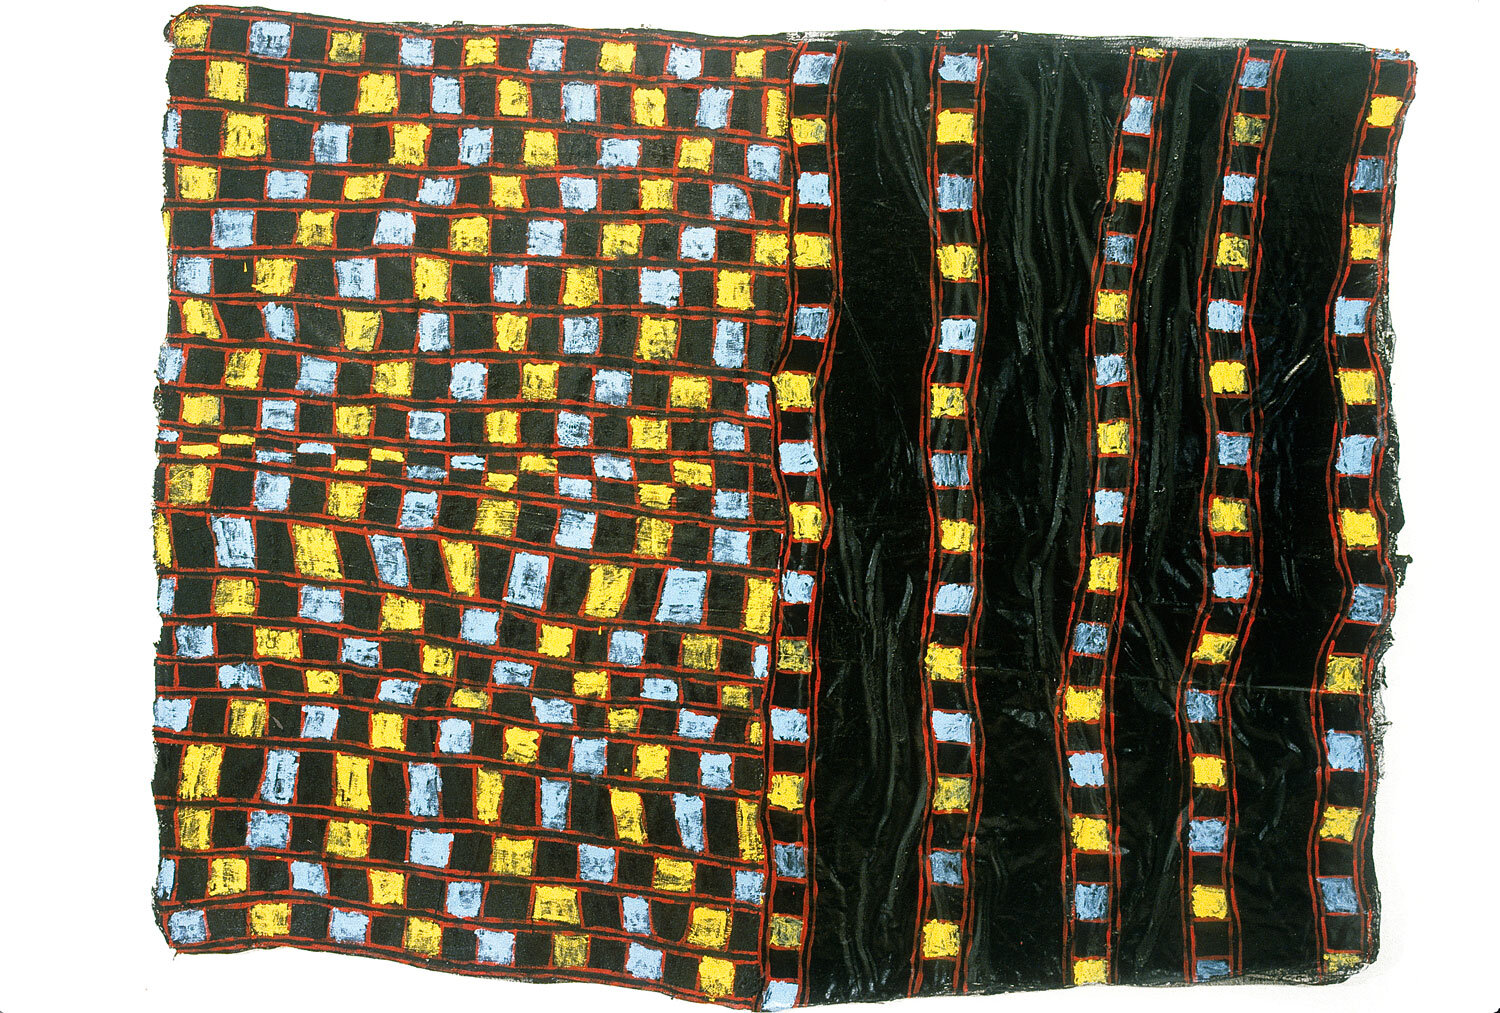   Checkered Madness , 1982, cheesecloth, latex enamel, gesso, 67 x 85 inches 